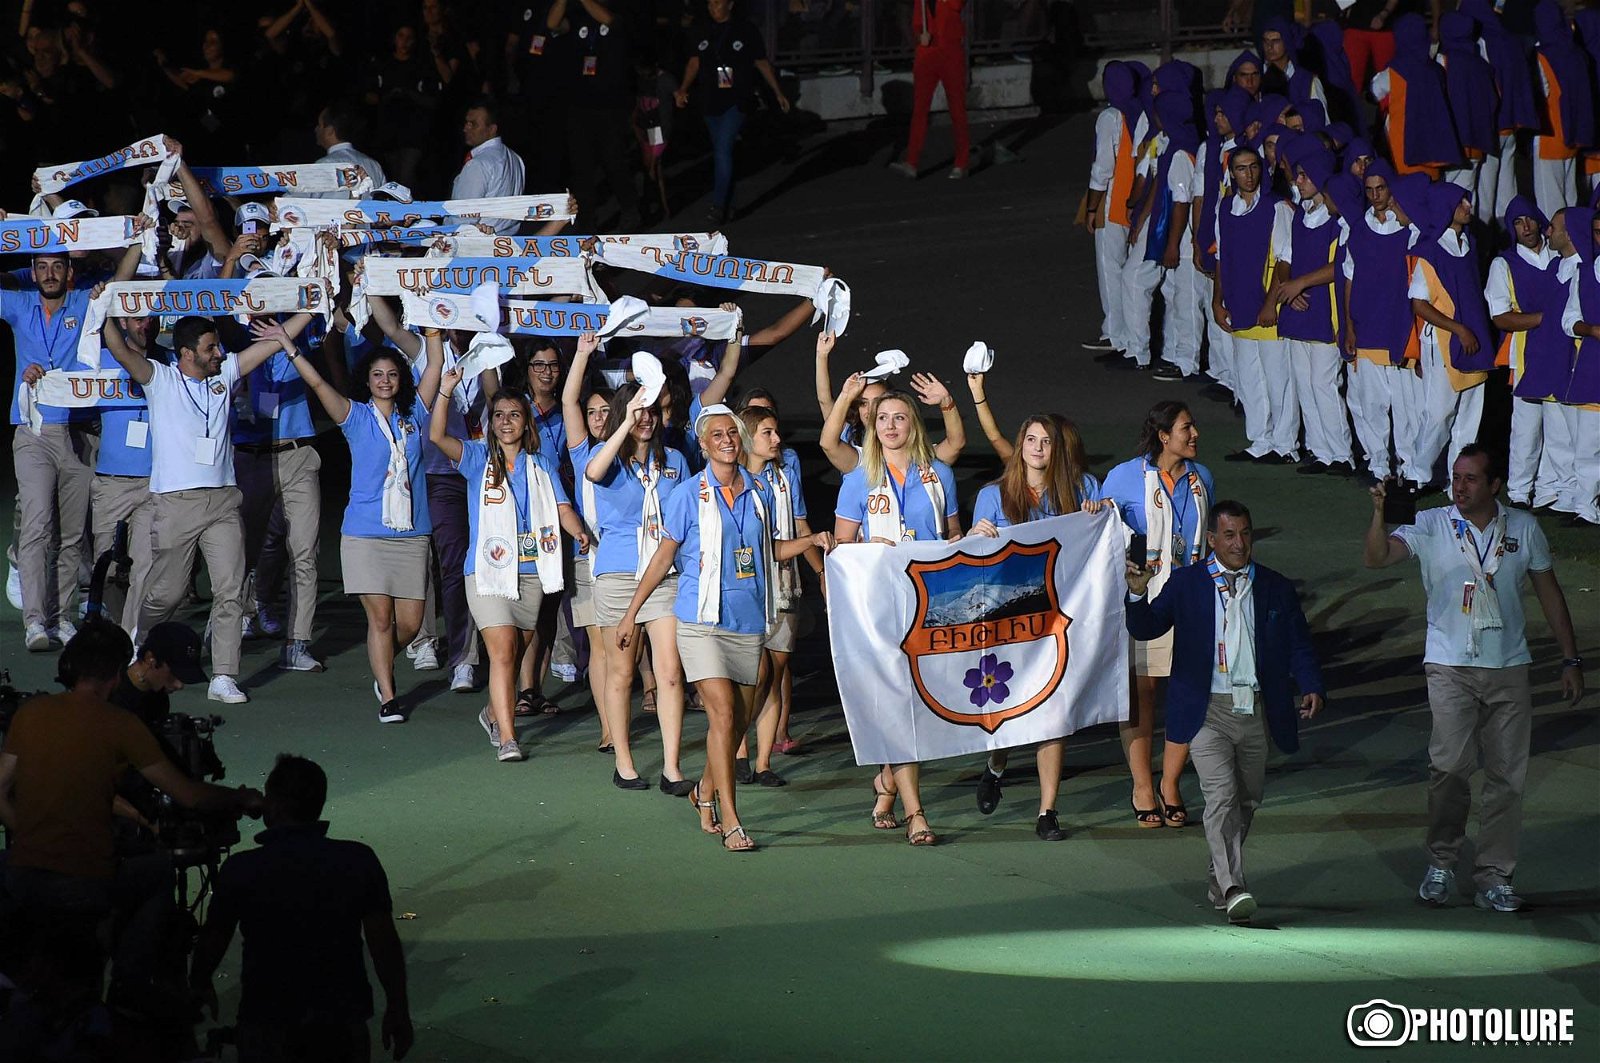 Teams Bitlis and Sasun entering the stadium at the opening ceremony